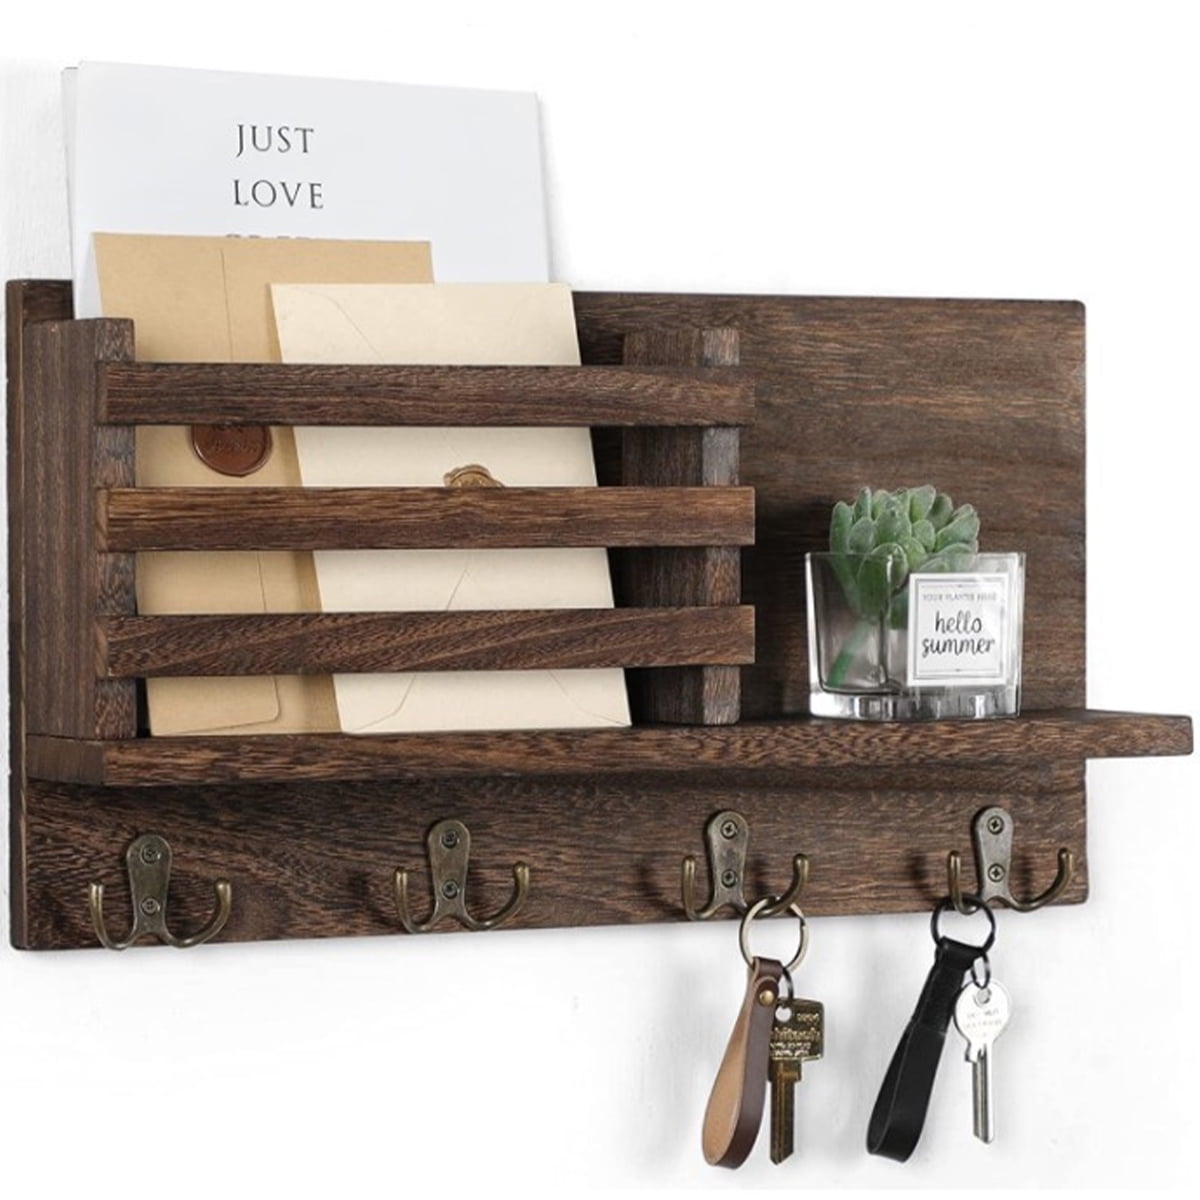 Key Holder for Wall with Shelf Rustic Mail Organizer Wall Mount